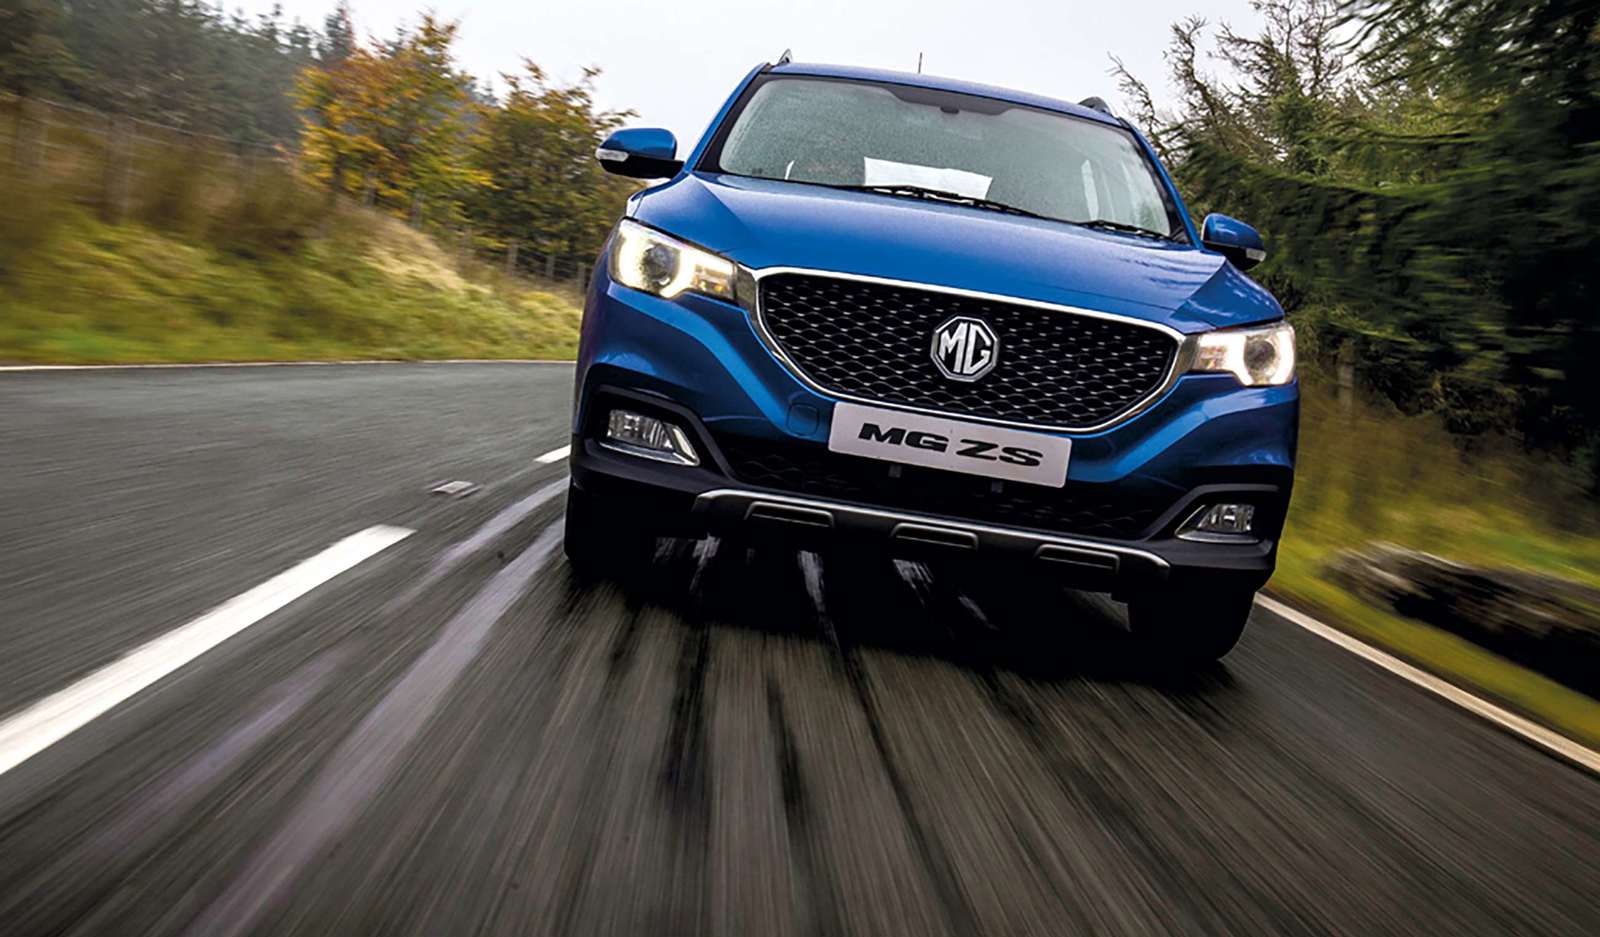 First Drive: MG ZS